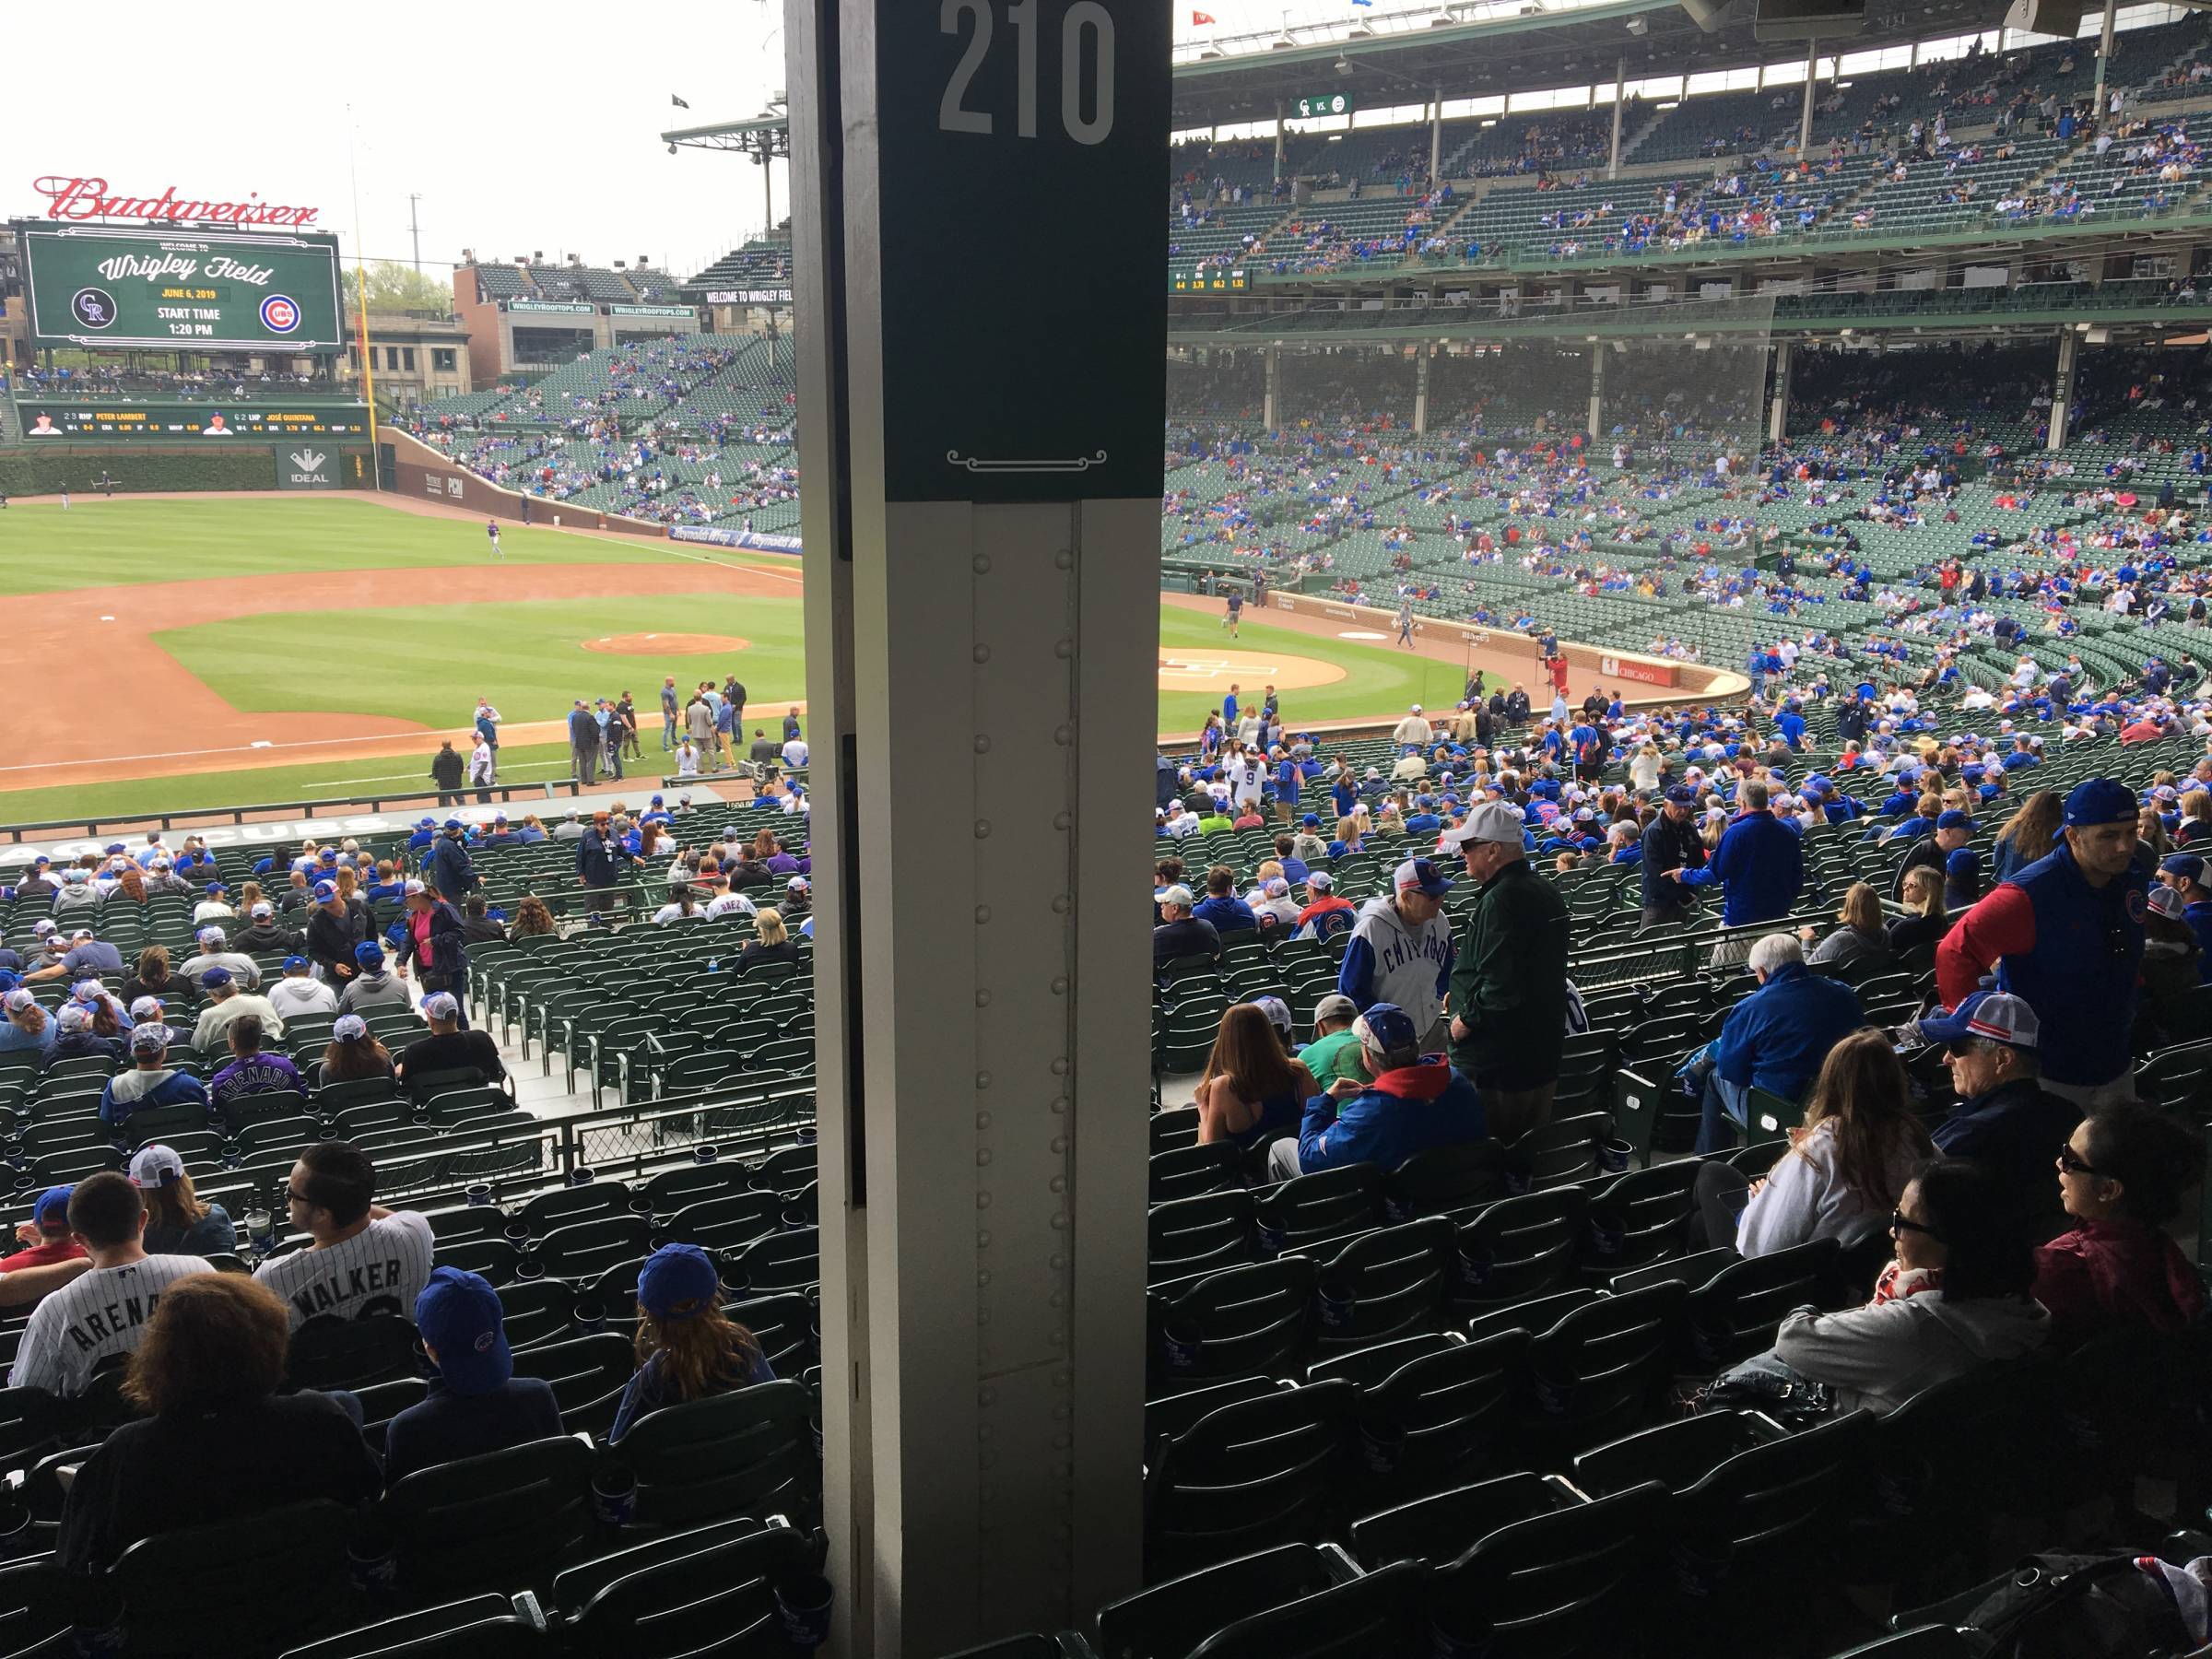 Pole in Section 210 at Wrigley Field